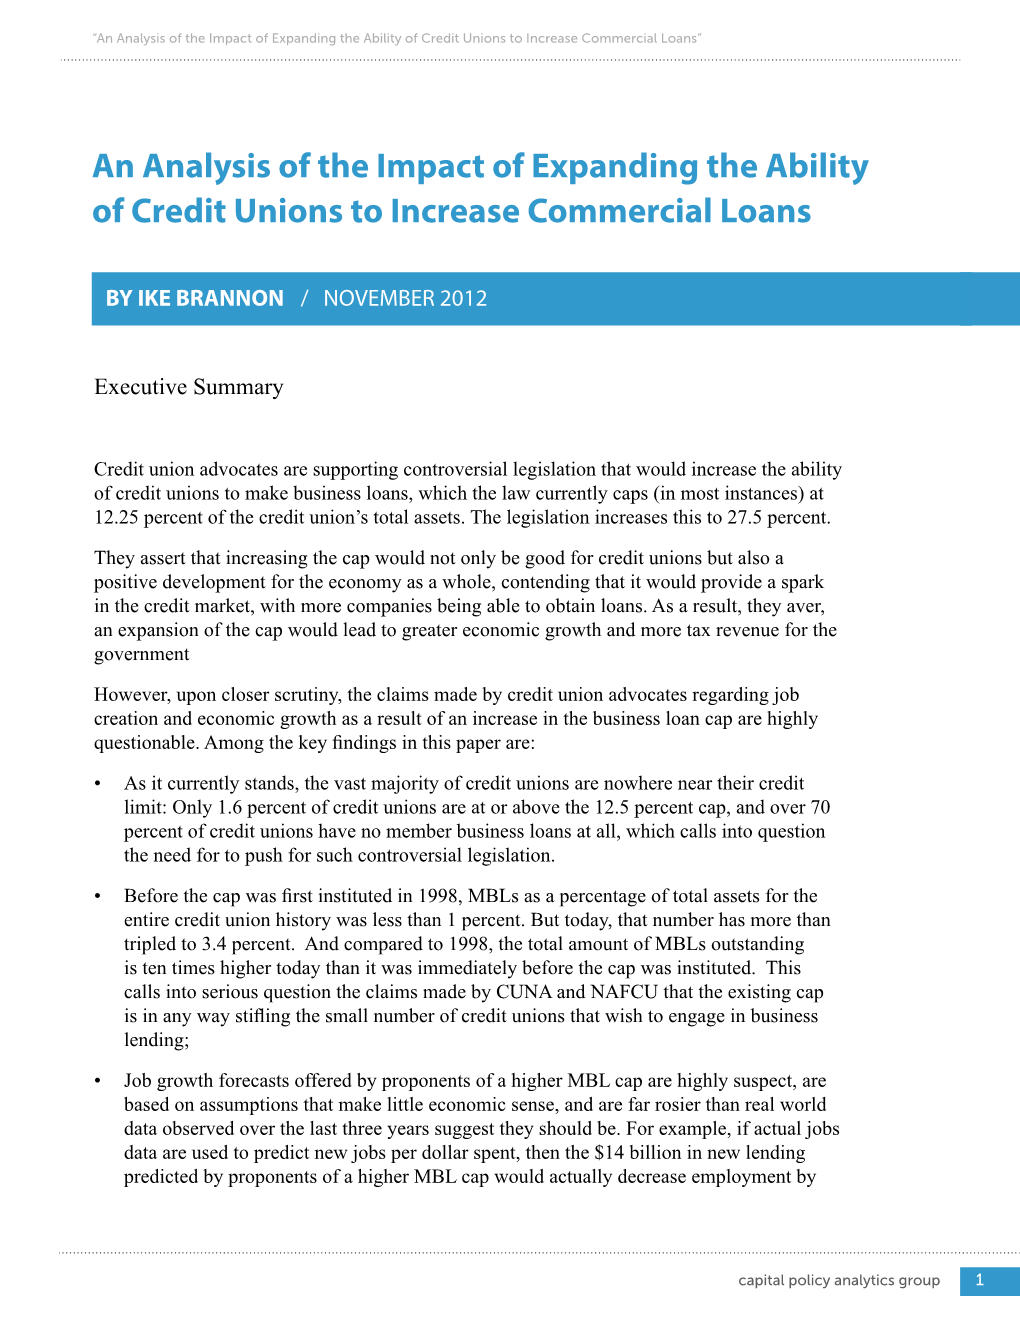 An Analysis of the Impact of Expanding the Ability of Credit Unions to Increase Commercial Loans”